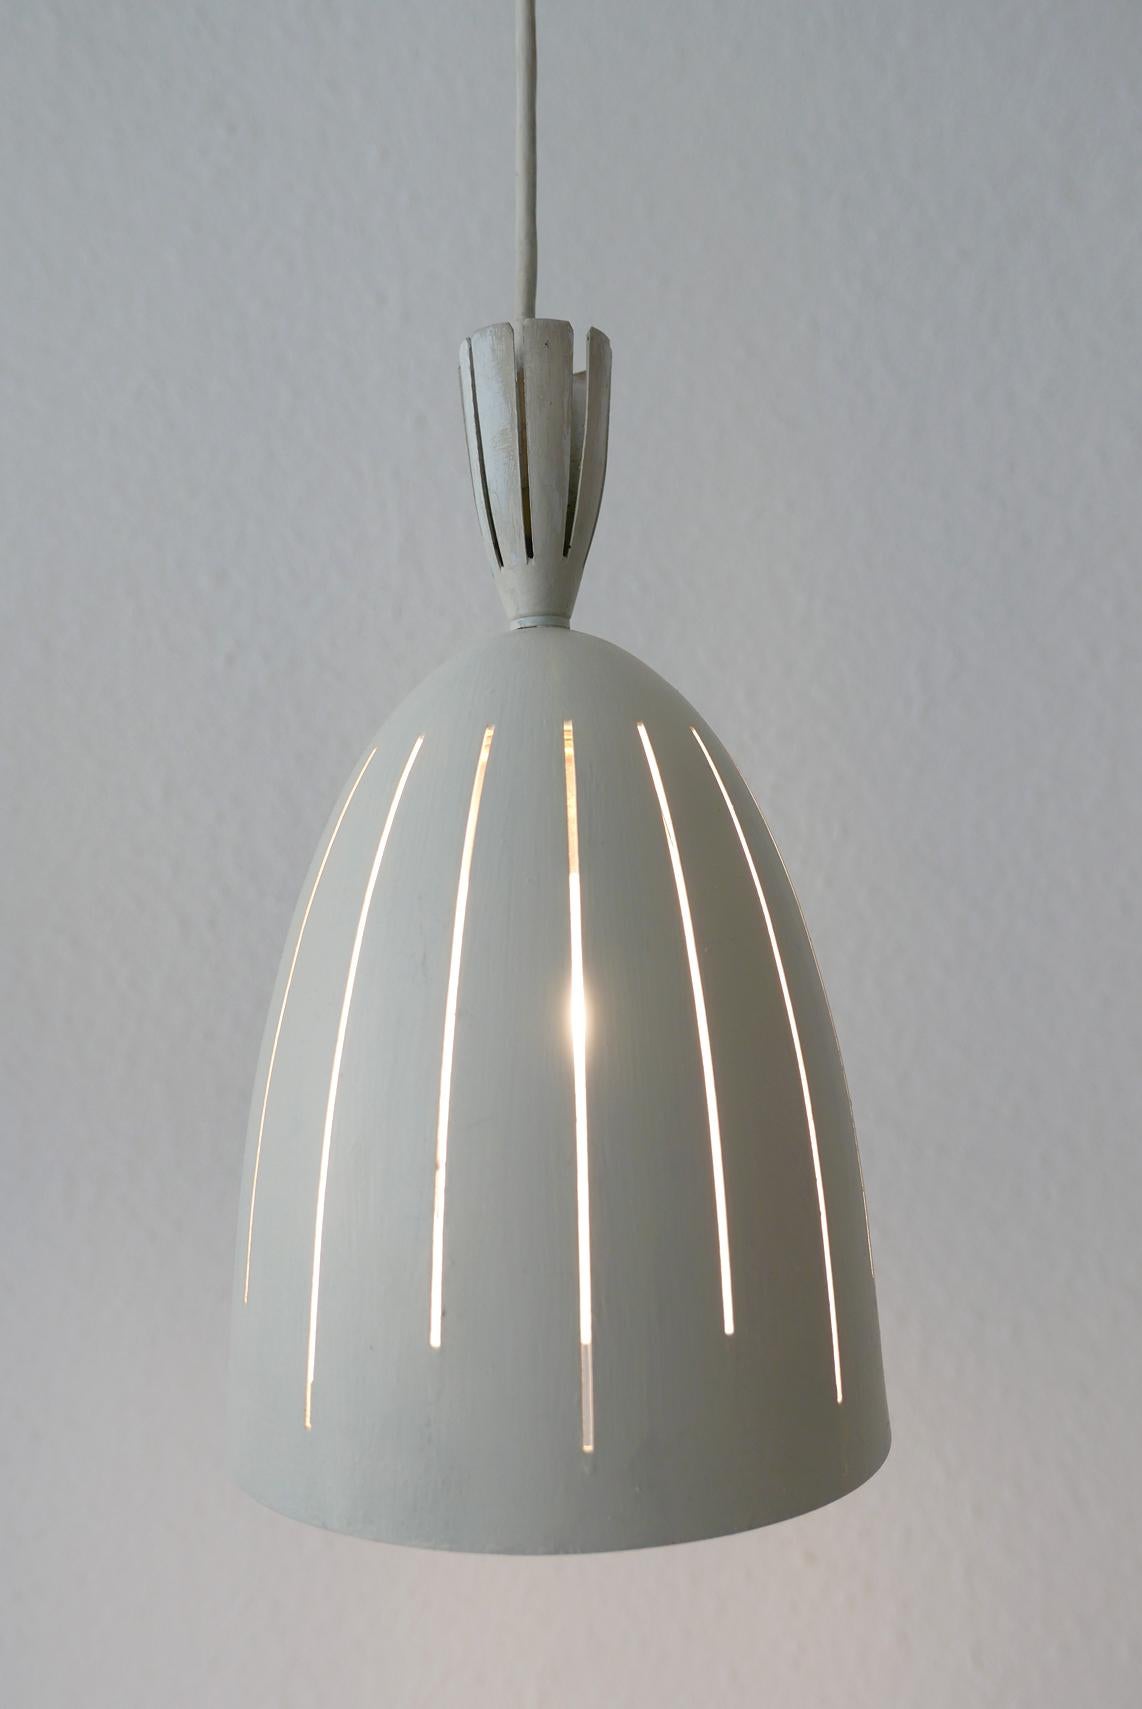 Set of Three Lovely Mid-Century Modern Diabolo Pendant Lamps, 1950s, Germany For Sale 2